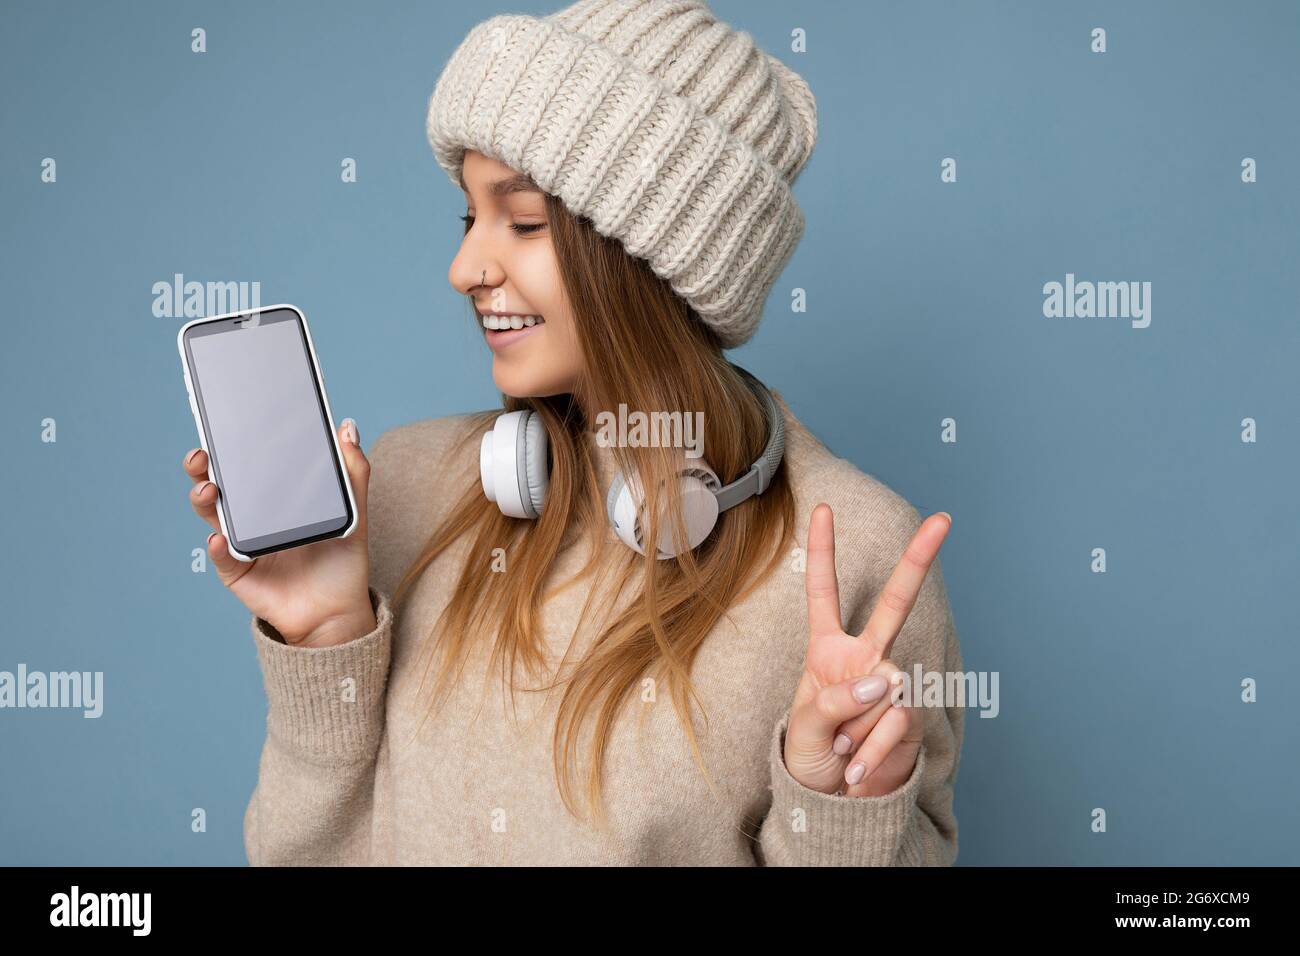 Closeup portrait Photo of beautiful positive joyful young dark blonde woman wearing beige stylish sweater and knitted hat wearing earphones and Stock Photo